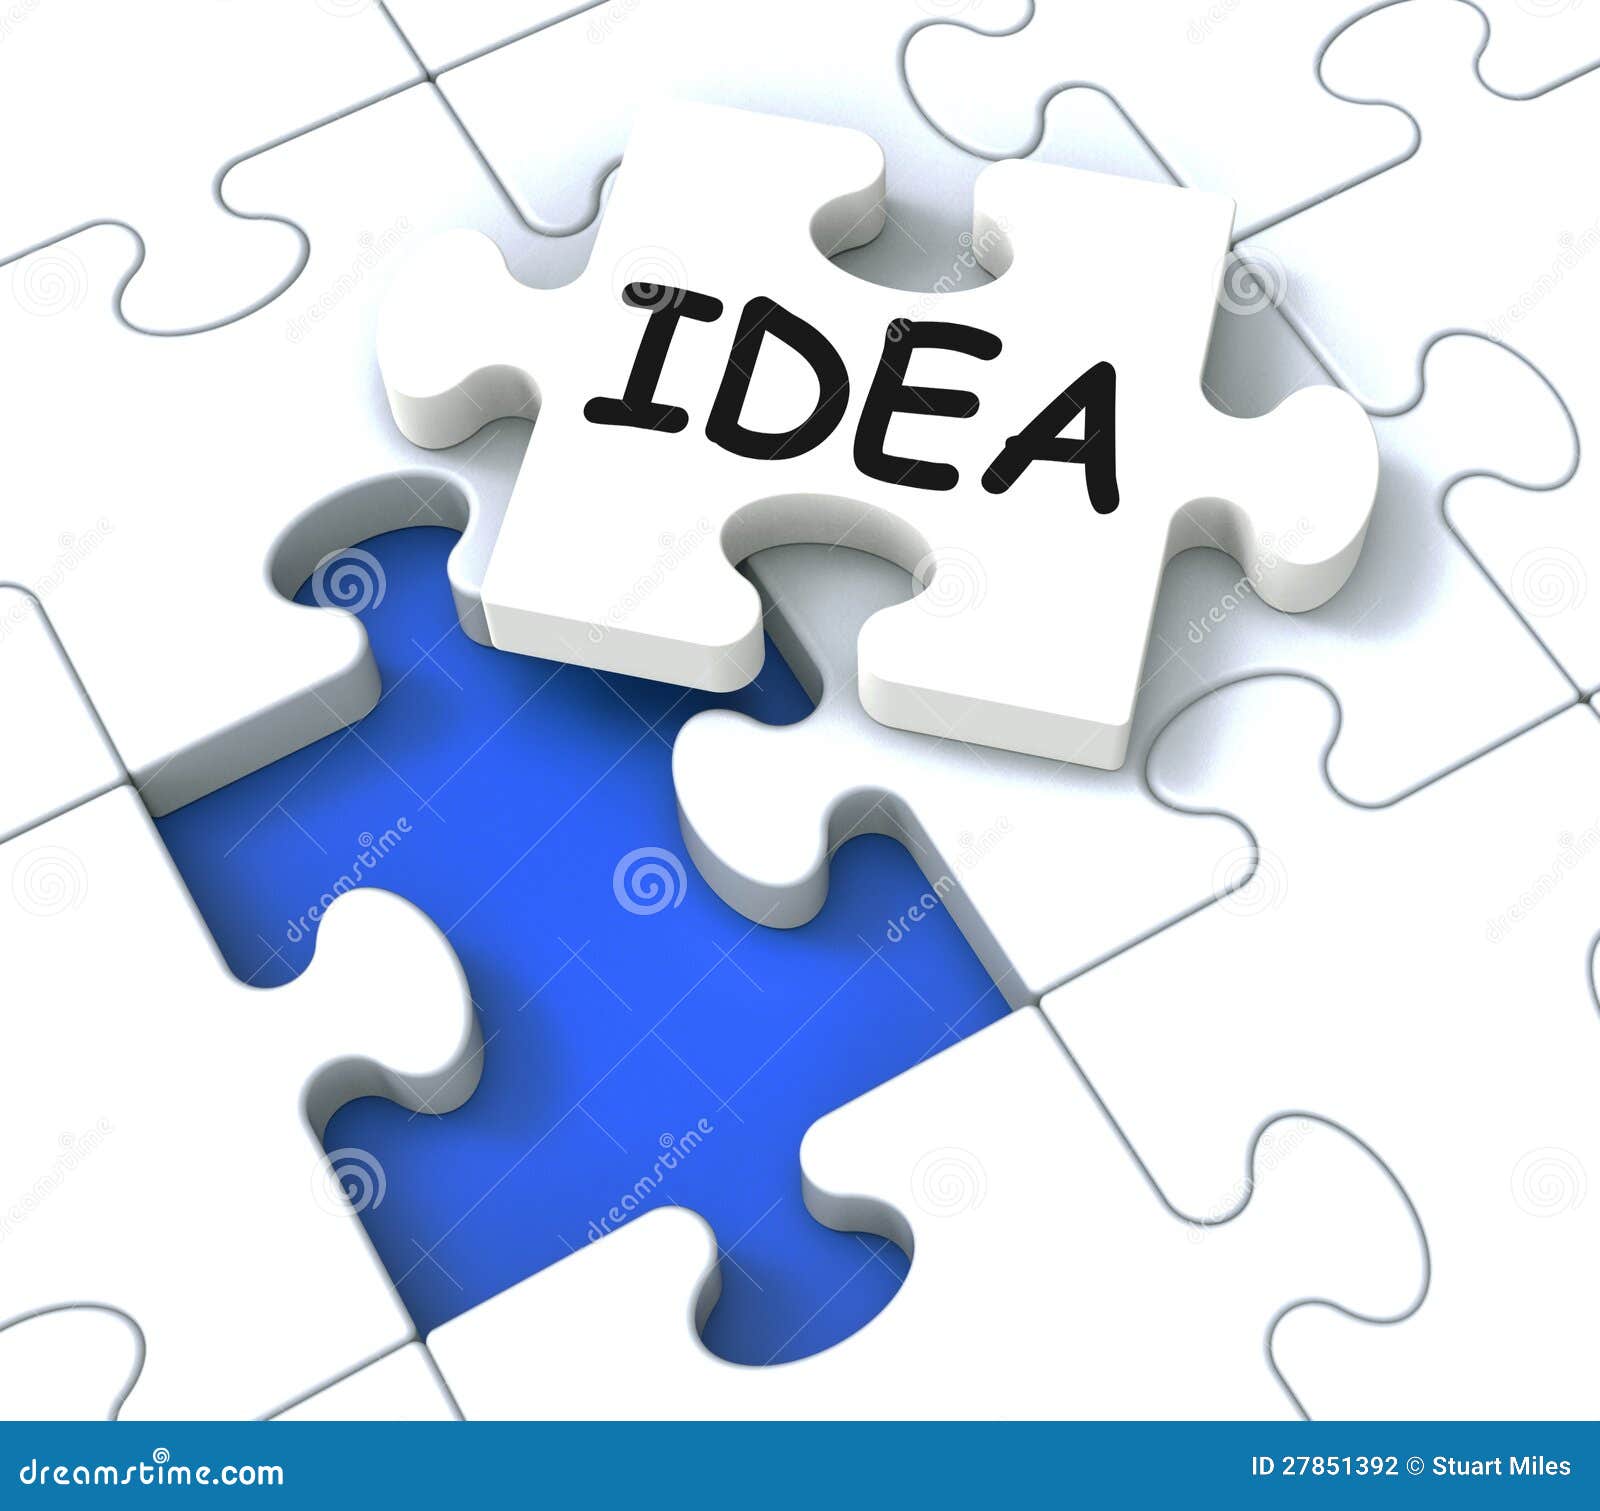 idea puzzle showing creative innovations